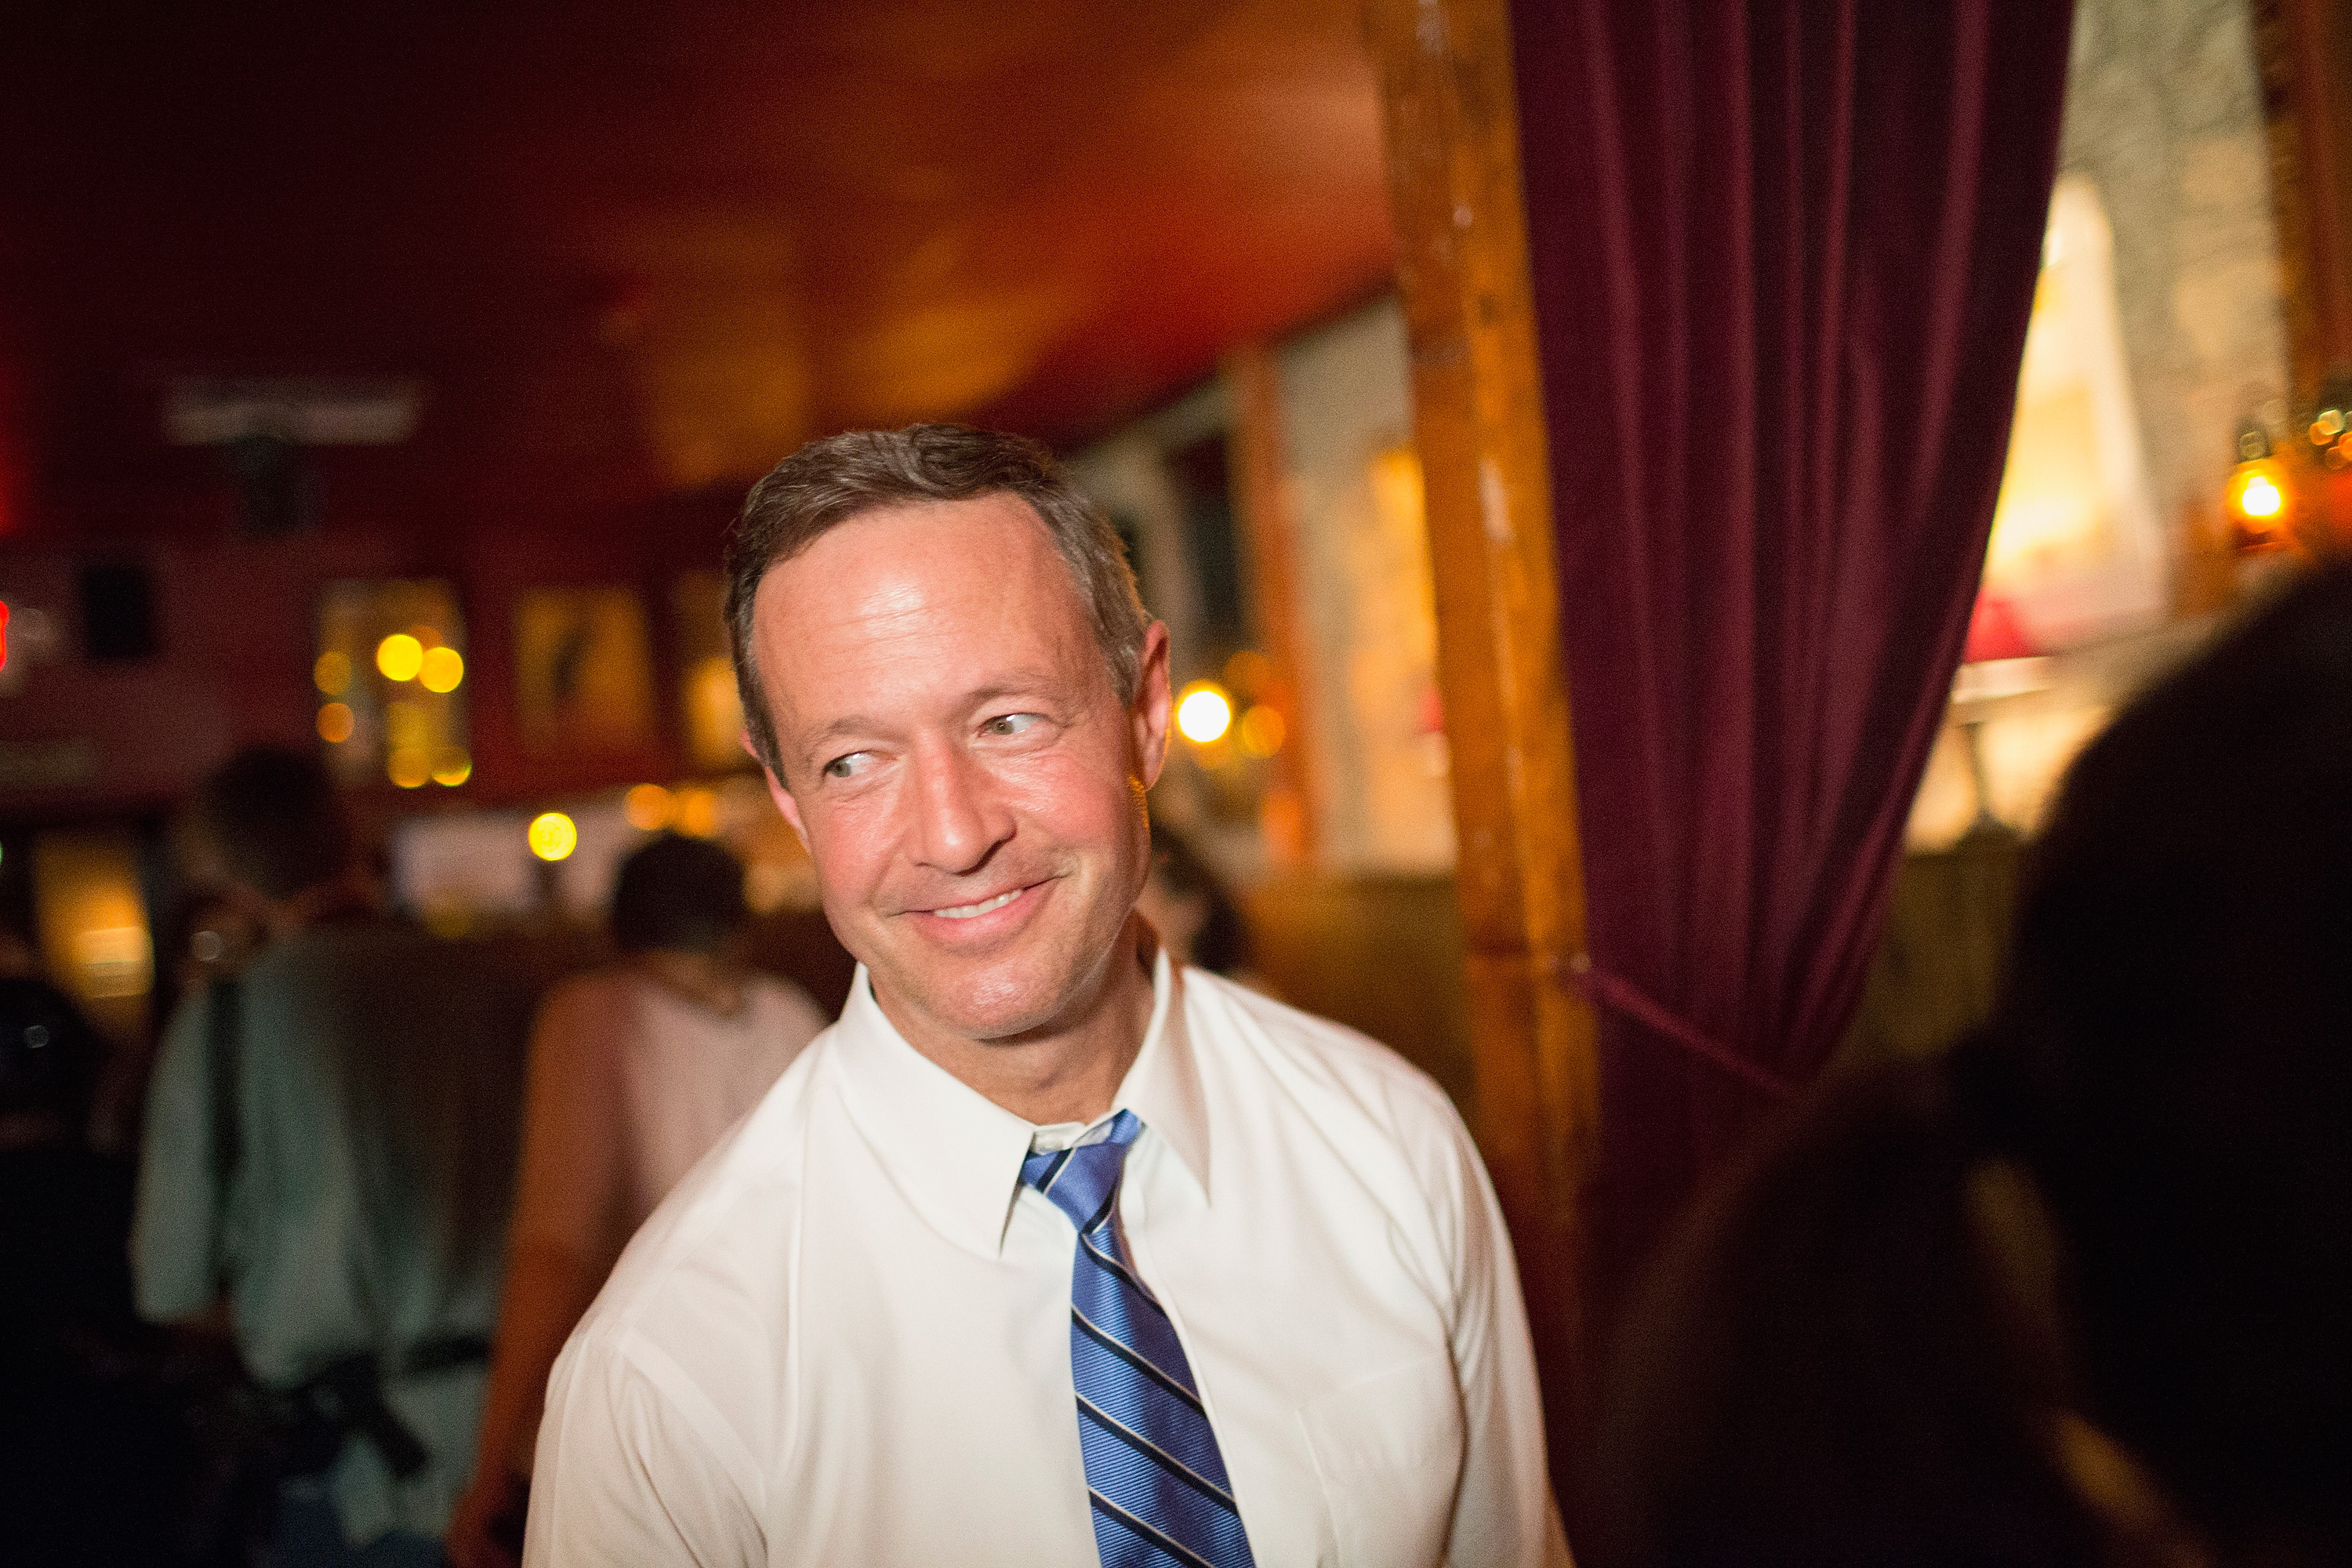 Democratic presidential hopeful and former Maryland Gov. Martin O'Malley speaks to guests during a campaign event at the Sanctuary Pub on June 11, 2015 in Iowa City, Iowa. (Scott Olson&mdash;Getty Images)